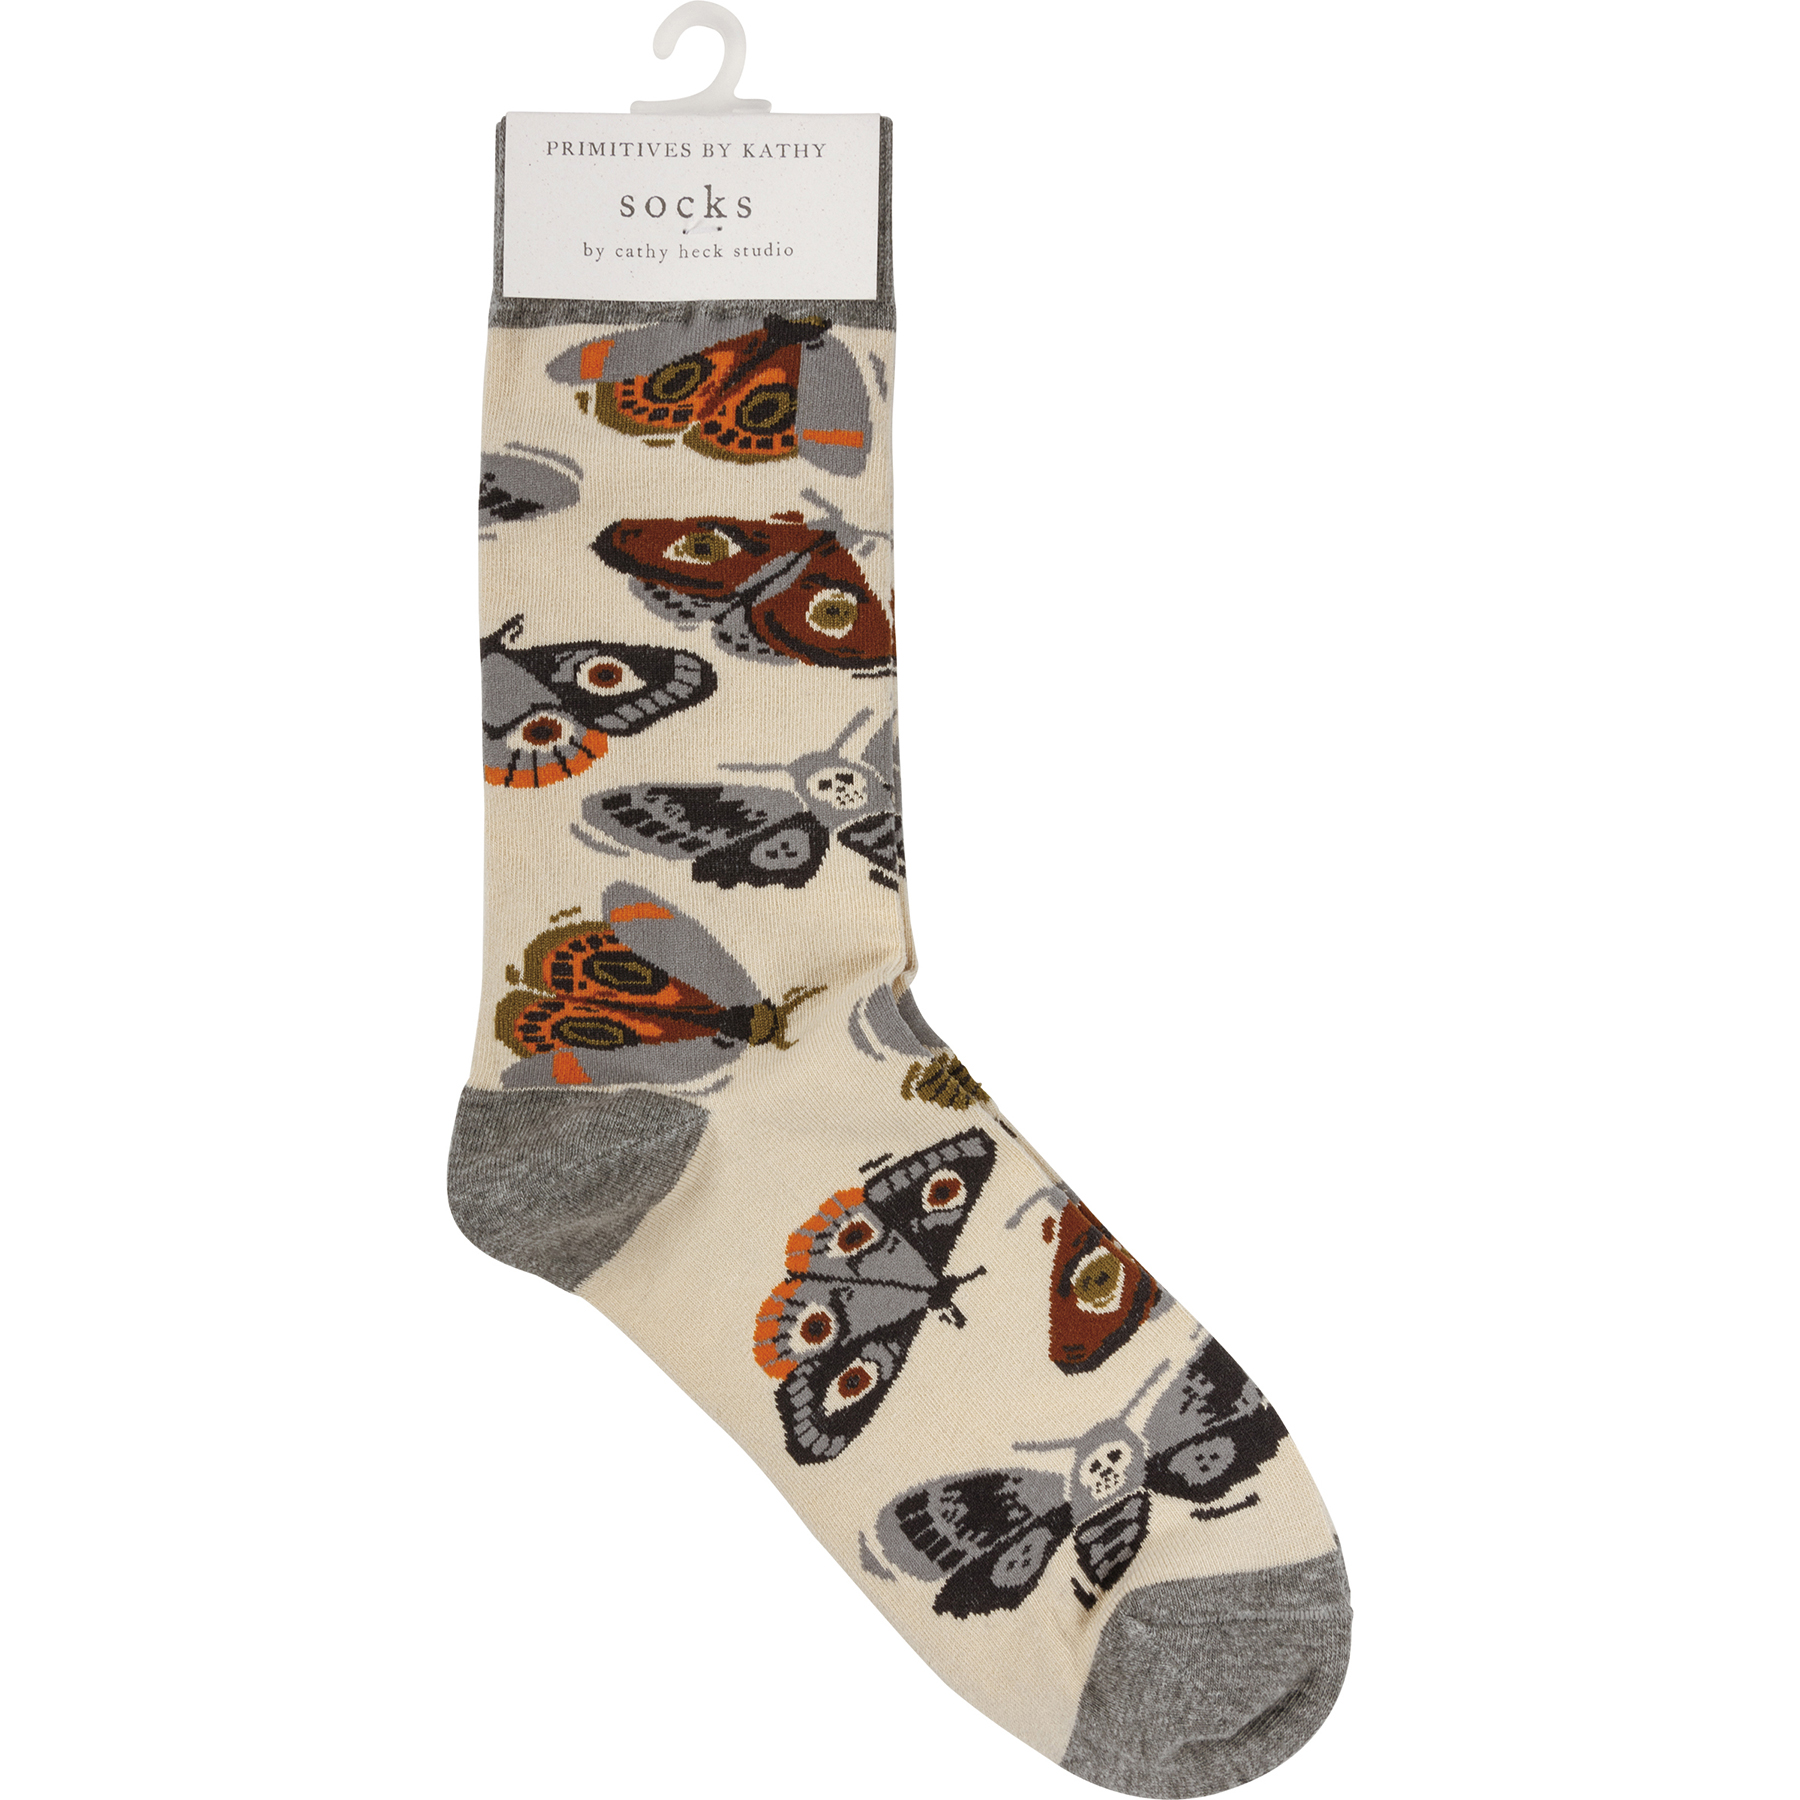 Socks Moth, SKU: 109306

These colorful socks feature woven Halloween moth designs. Cotton, nylon, spandex. One size fits most.

DETAILS
Dimensions: One Size Fits Most
Material: Cotton, Nylon, Spandex
UPC: 190134093068
Artist: Cathy Heck Studios